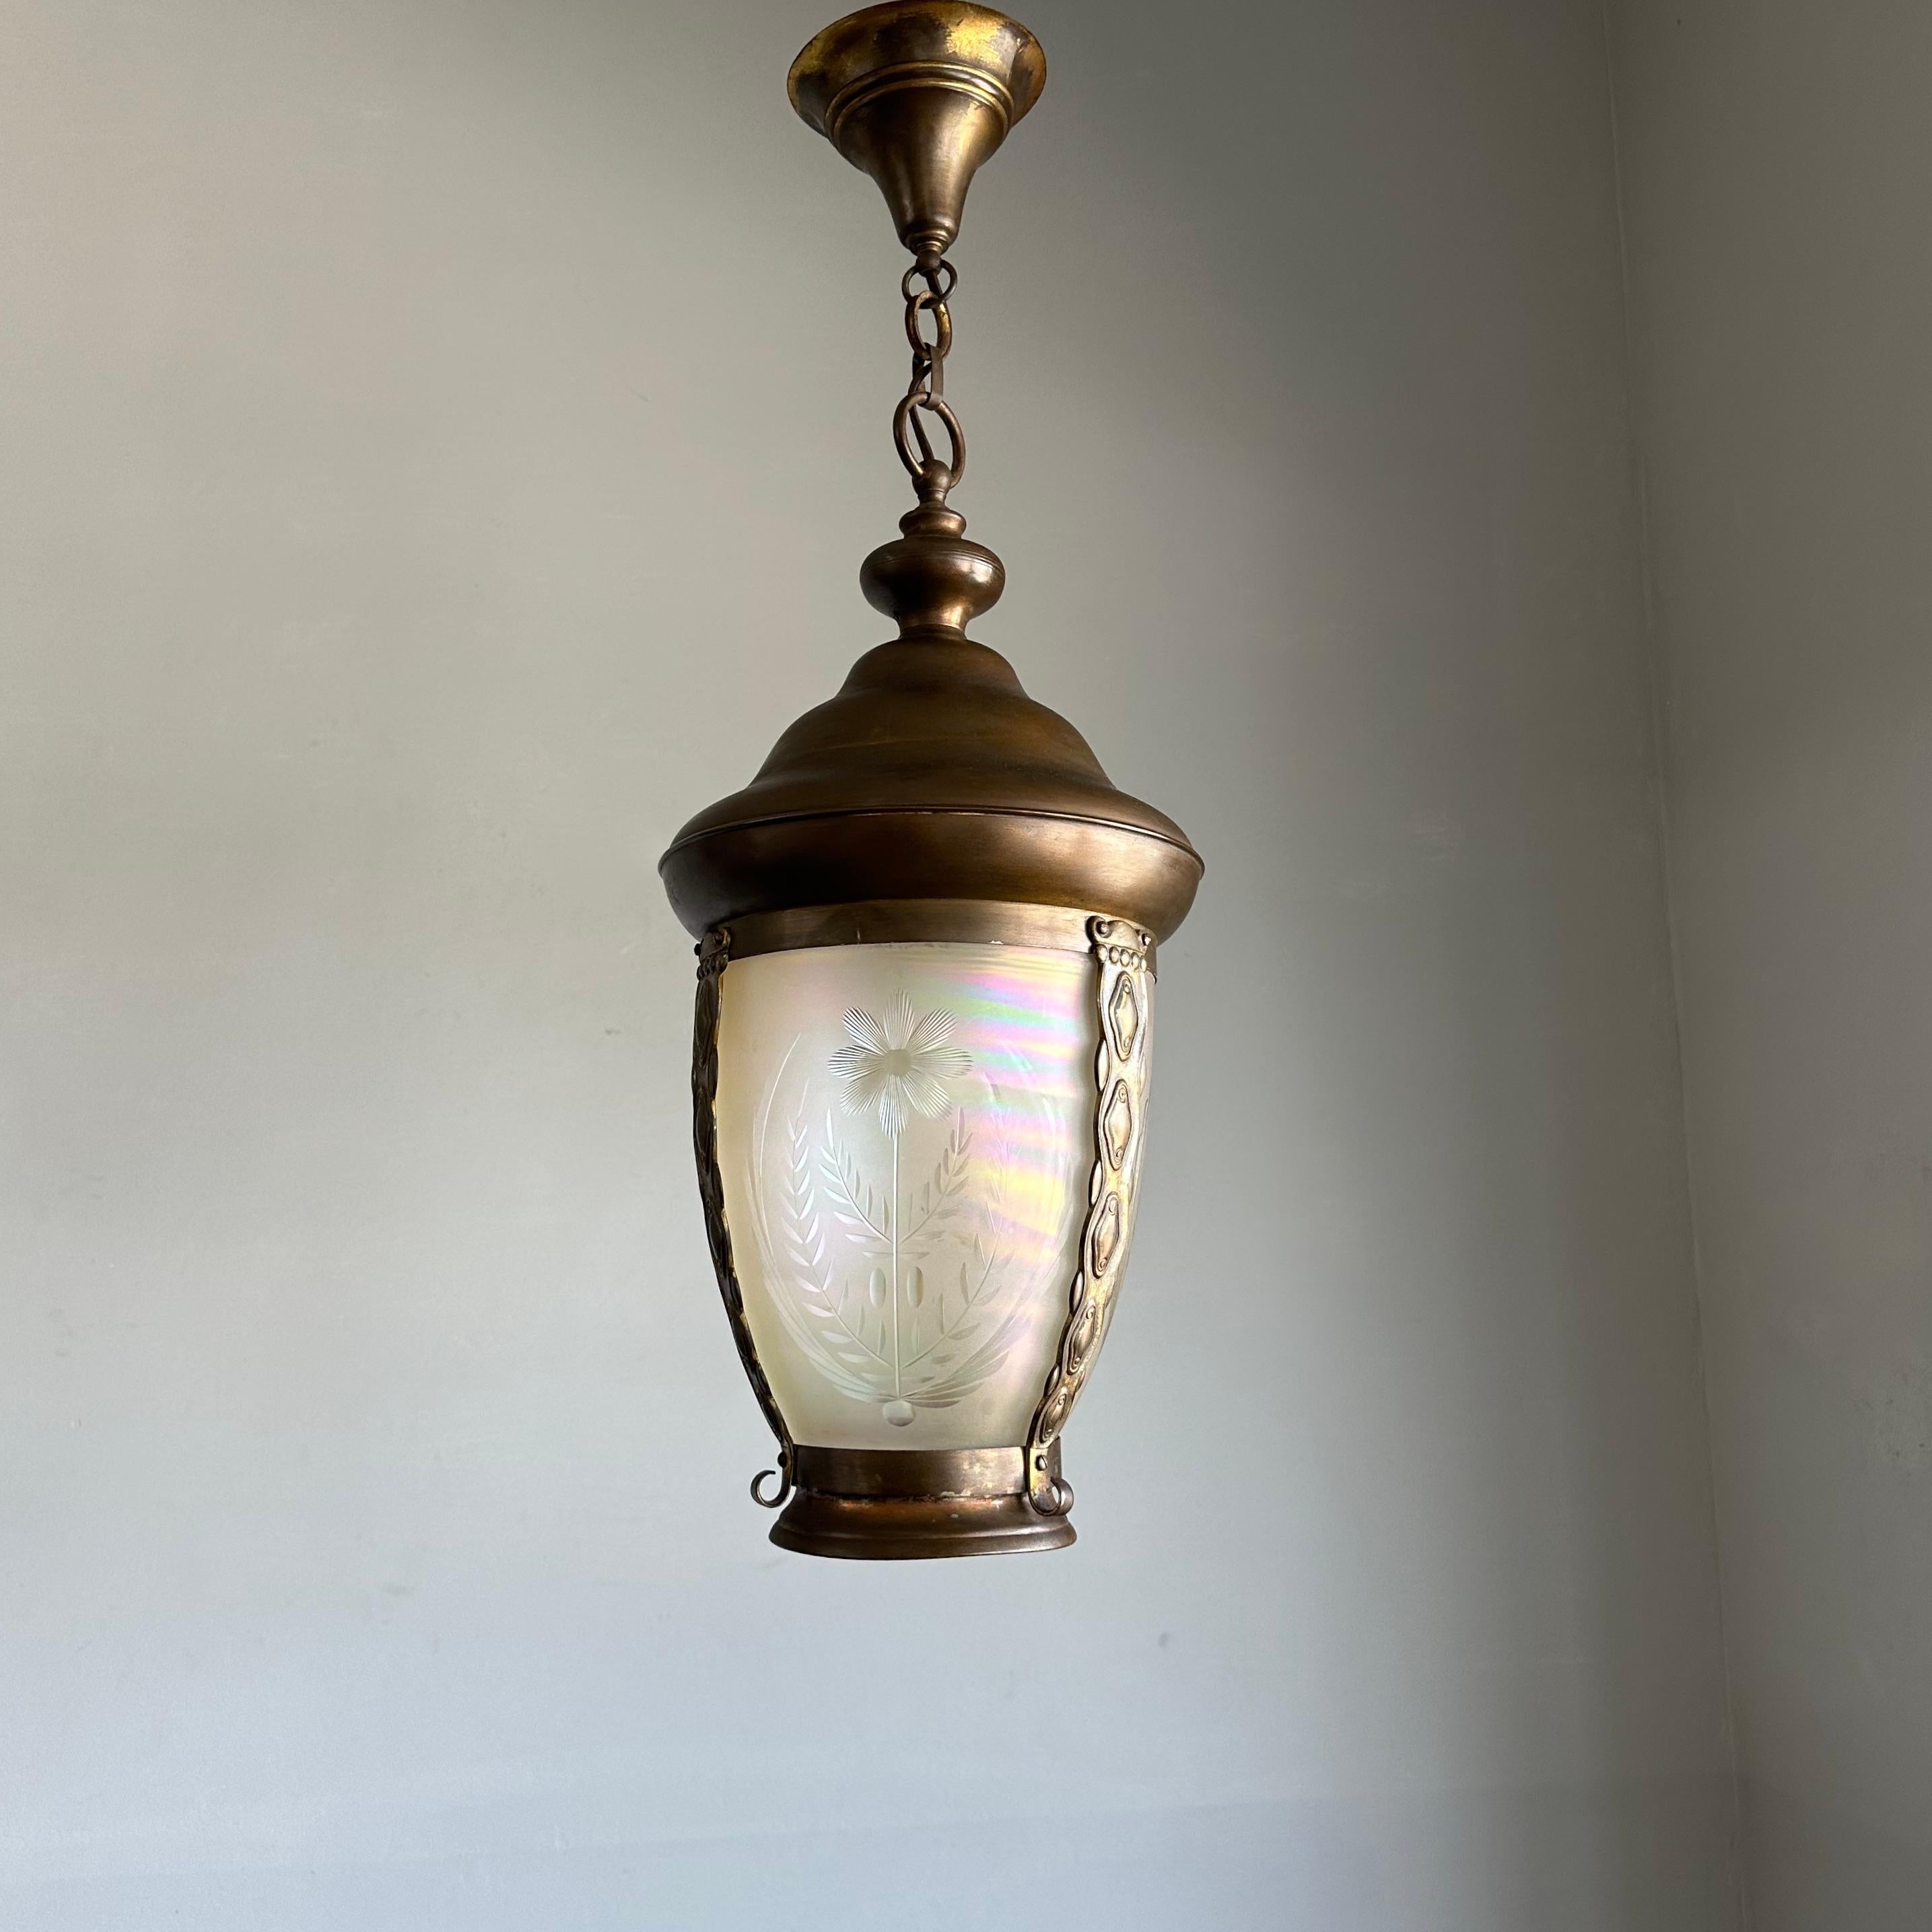 Handcrafted and large, rounded glass, stylish lantern or ceiling lamp.

This all handcrafted, large size and great looking ceiling lamp is another one of our recent great finds. The beautiful overall design is what first catches your attention and